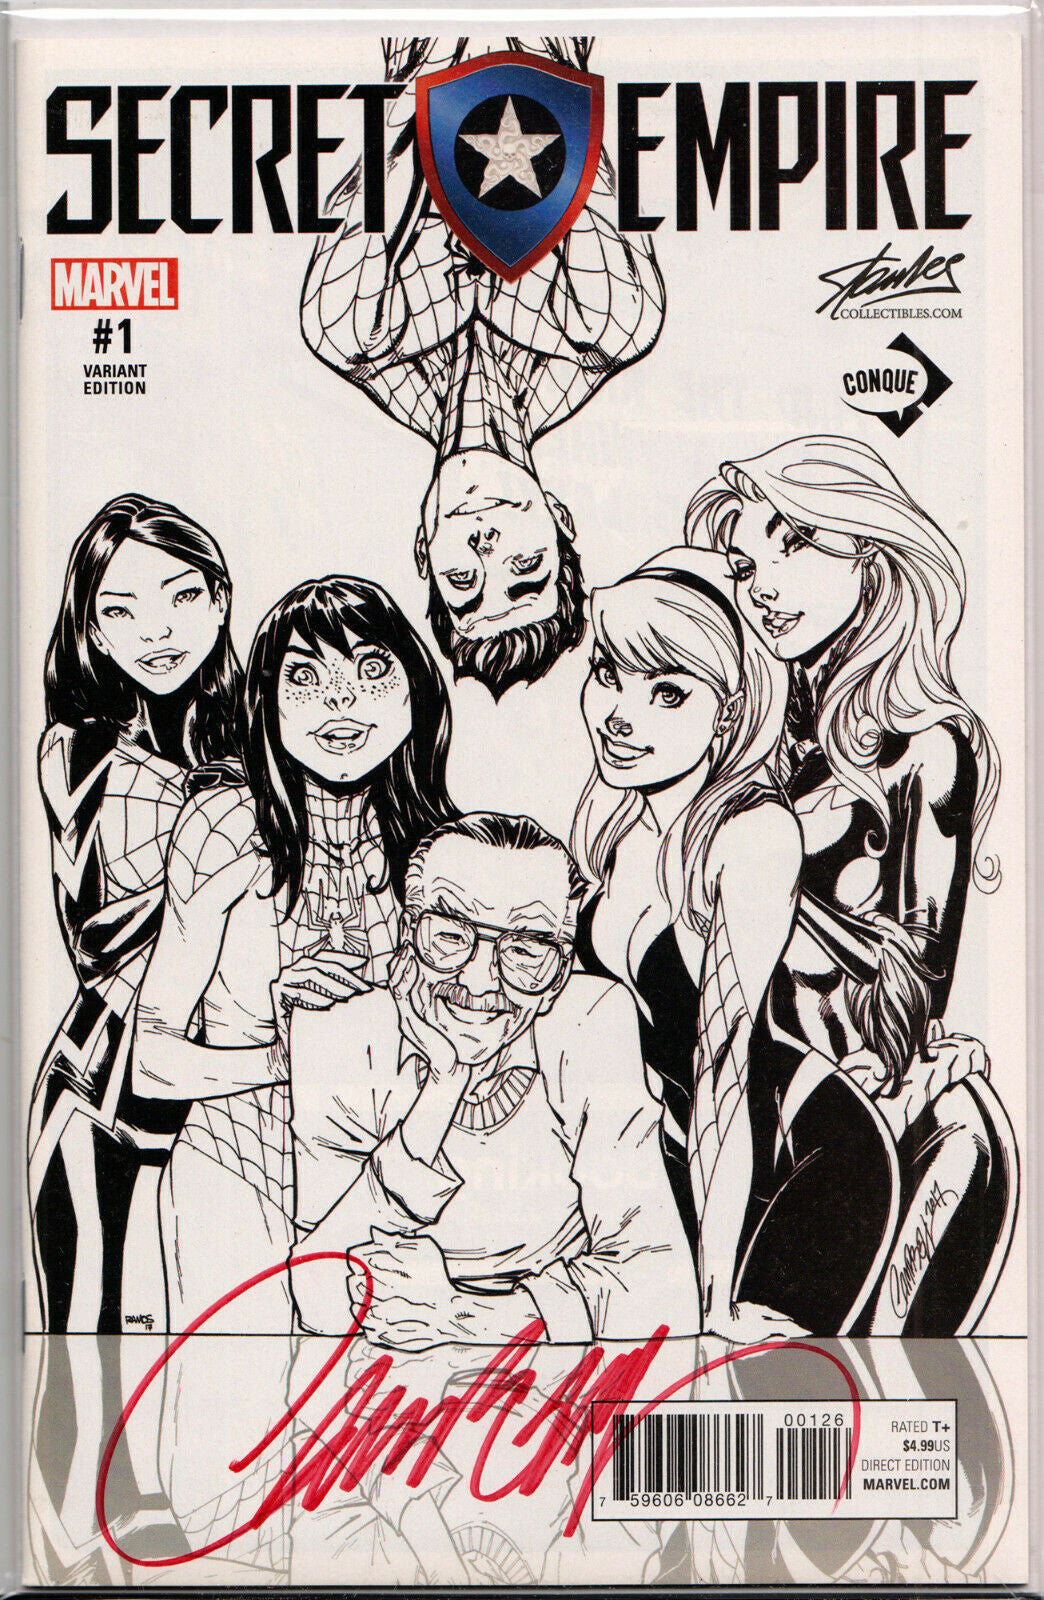 SECRET EMPIRE #1 CONQUE CON B&W EXCLUSIVE VARIANT ~ SIGNED BY J. SCOTT CAMPBELL